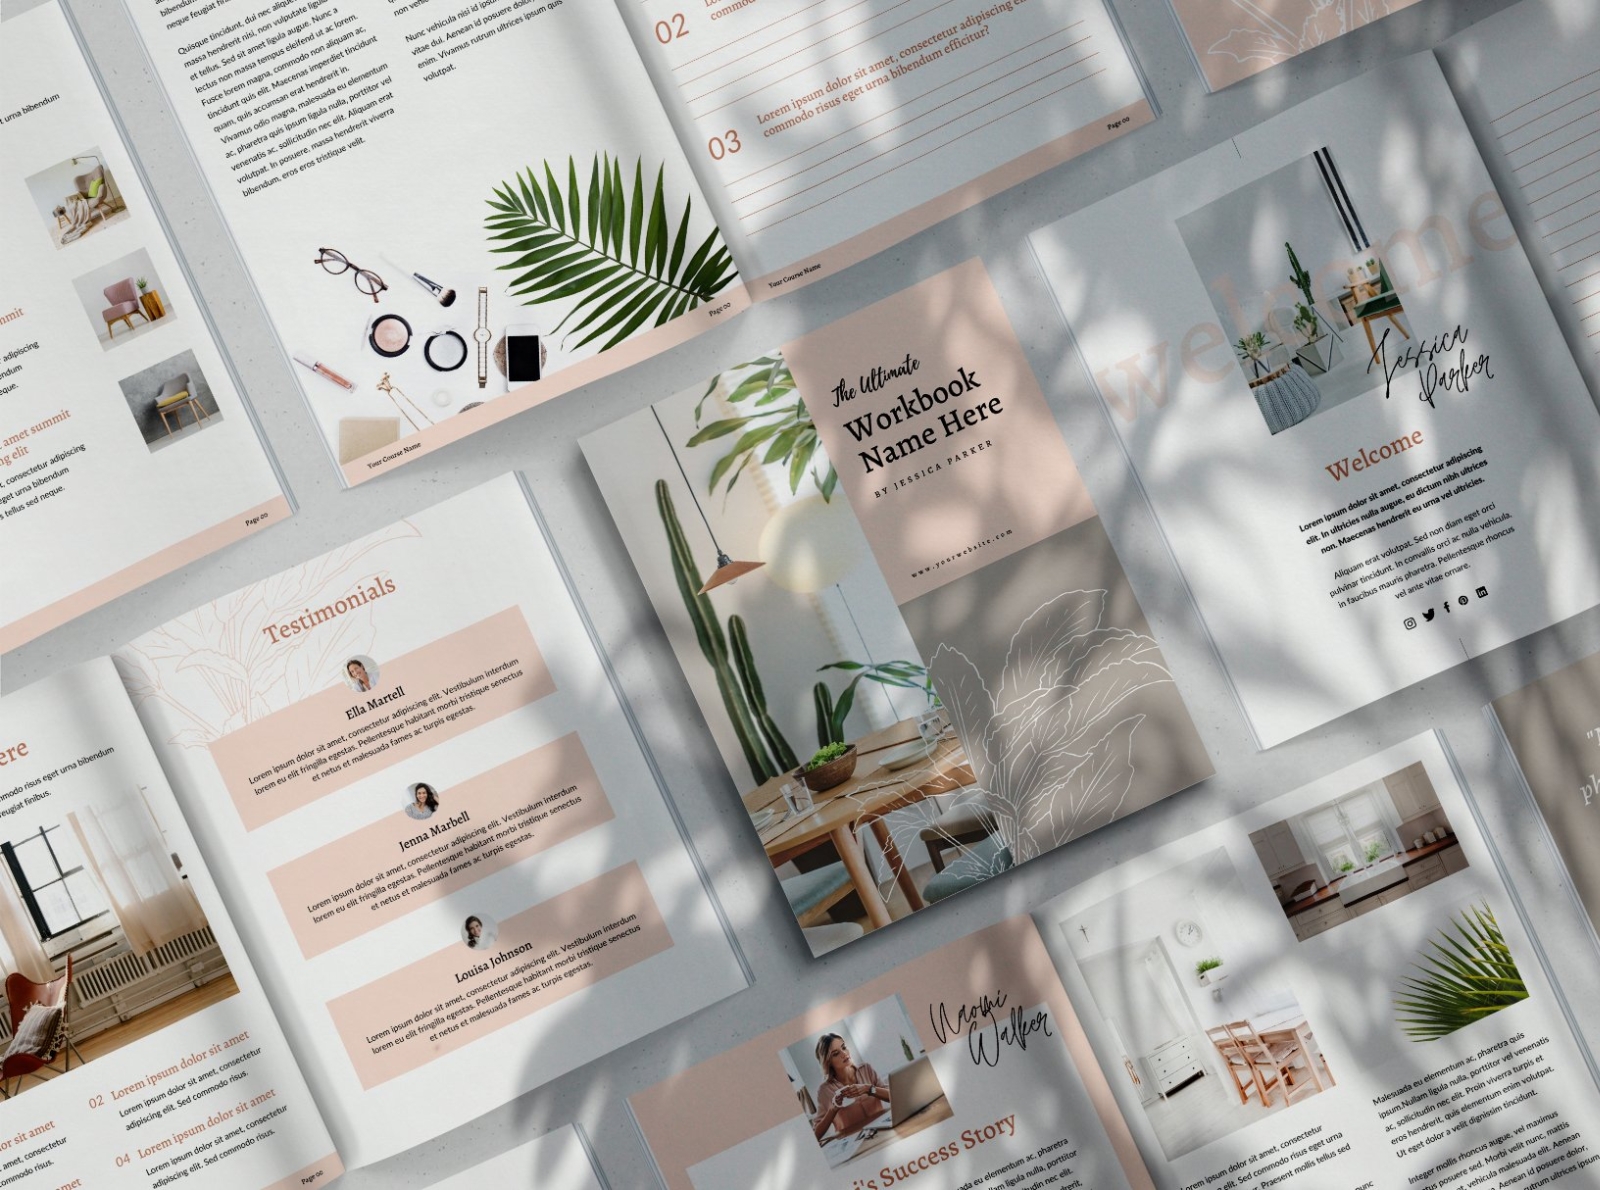 Download Canva Workbook Creator - 64 Pages by Brochure Design on ...